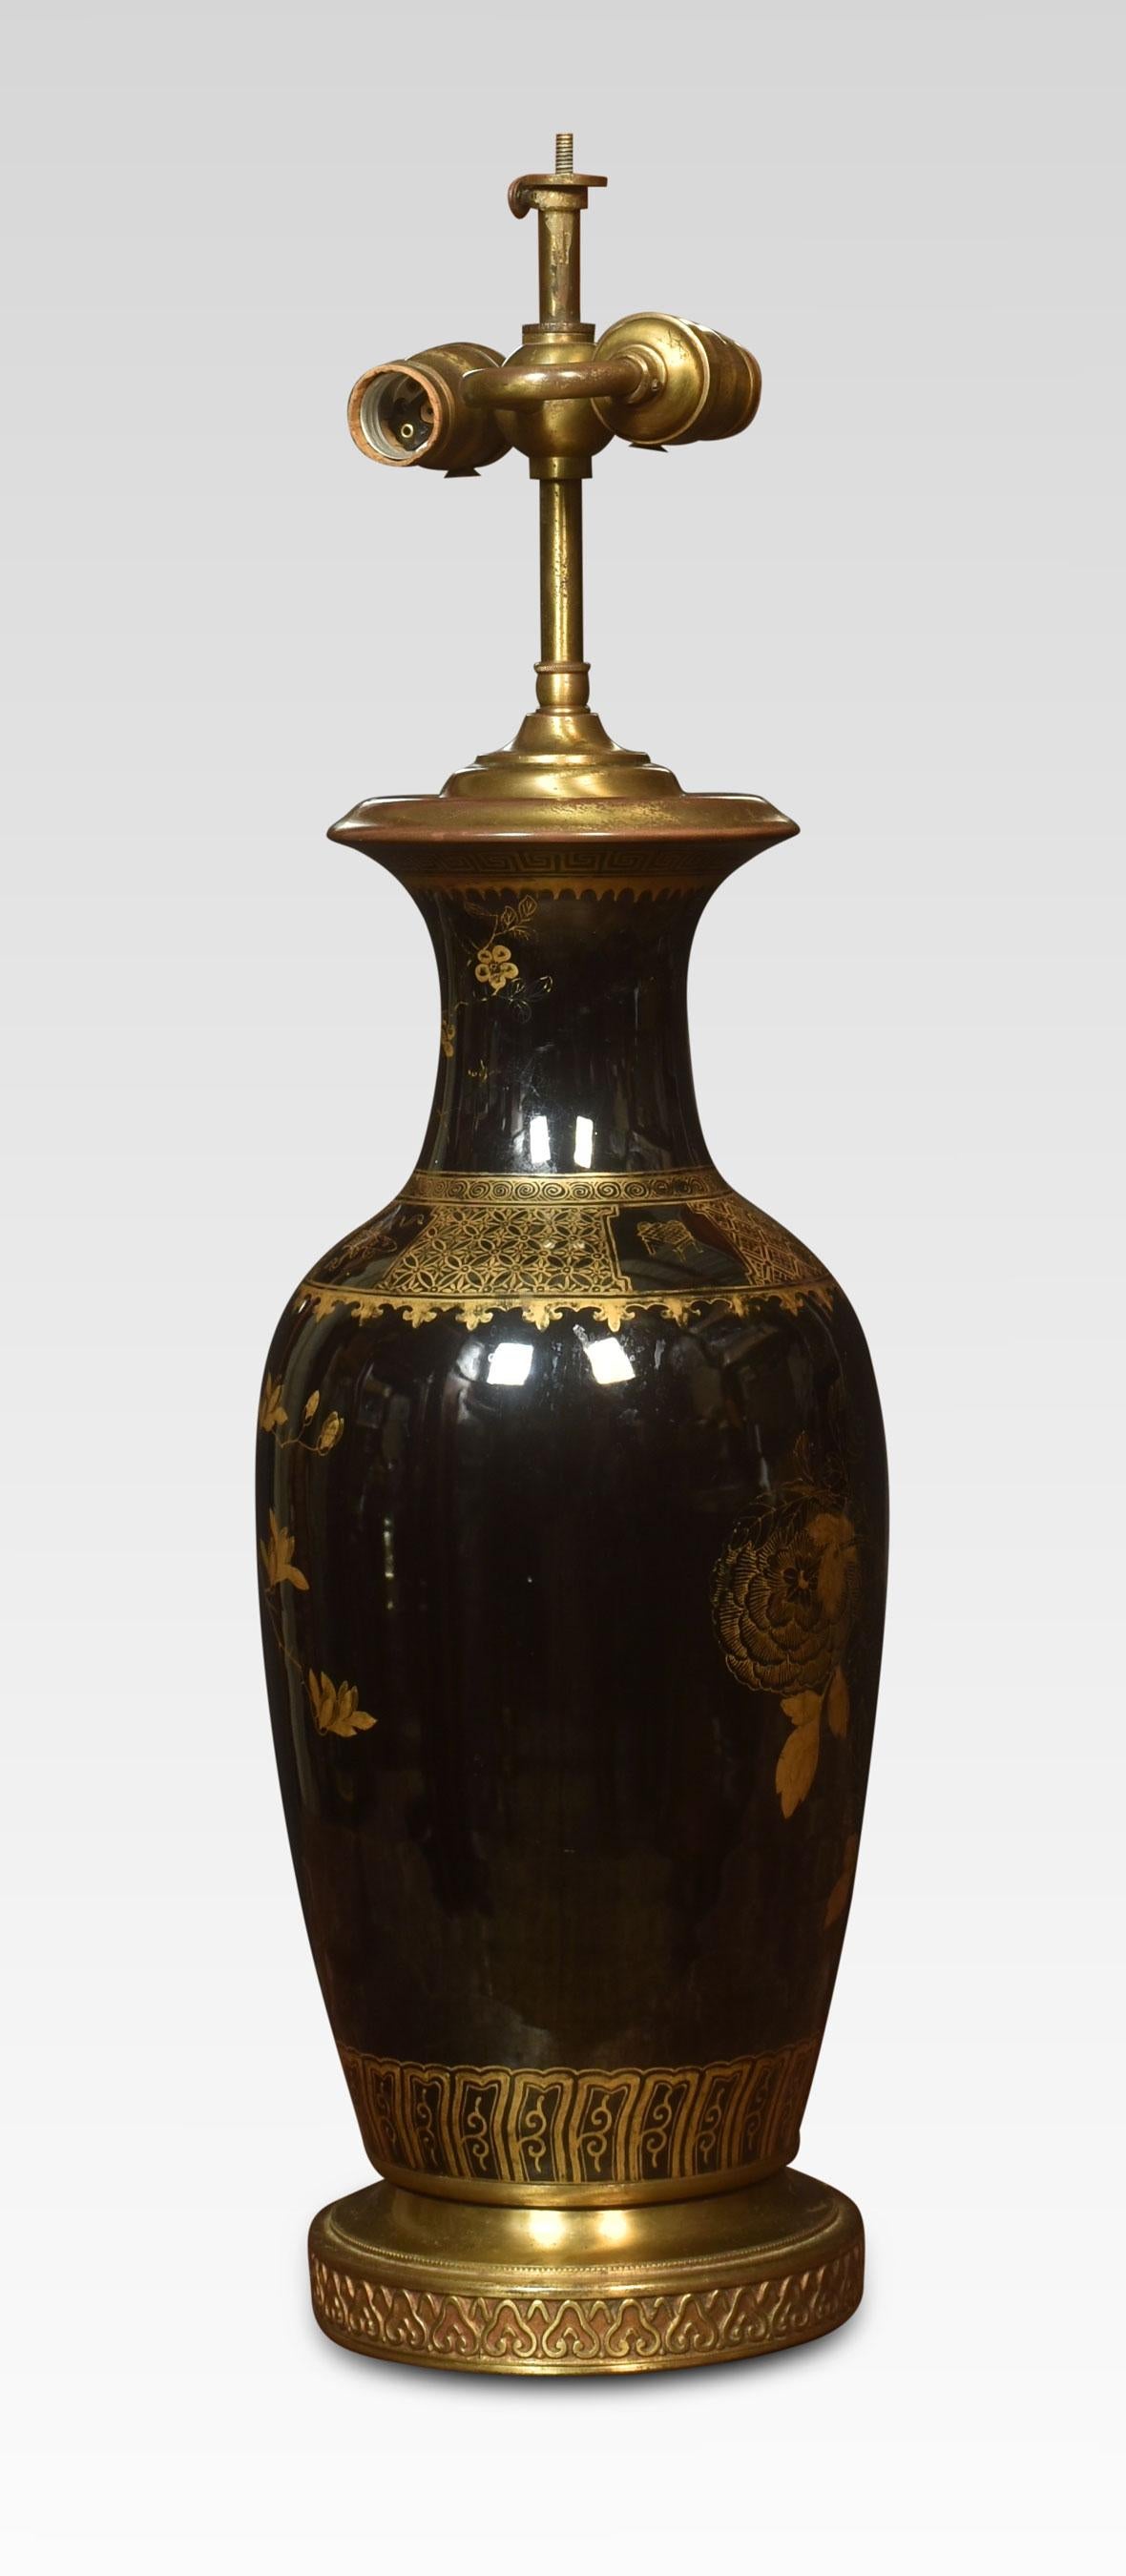 Famille Noire baluster vase lamp with gilded detail on black background. Raised up on circular base.
Dimensions
Height 26 inches
Width 7.5 inches
Depth 7.5 inches.